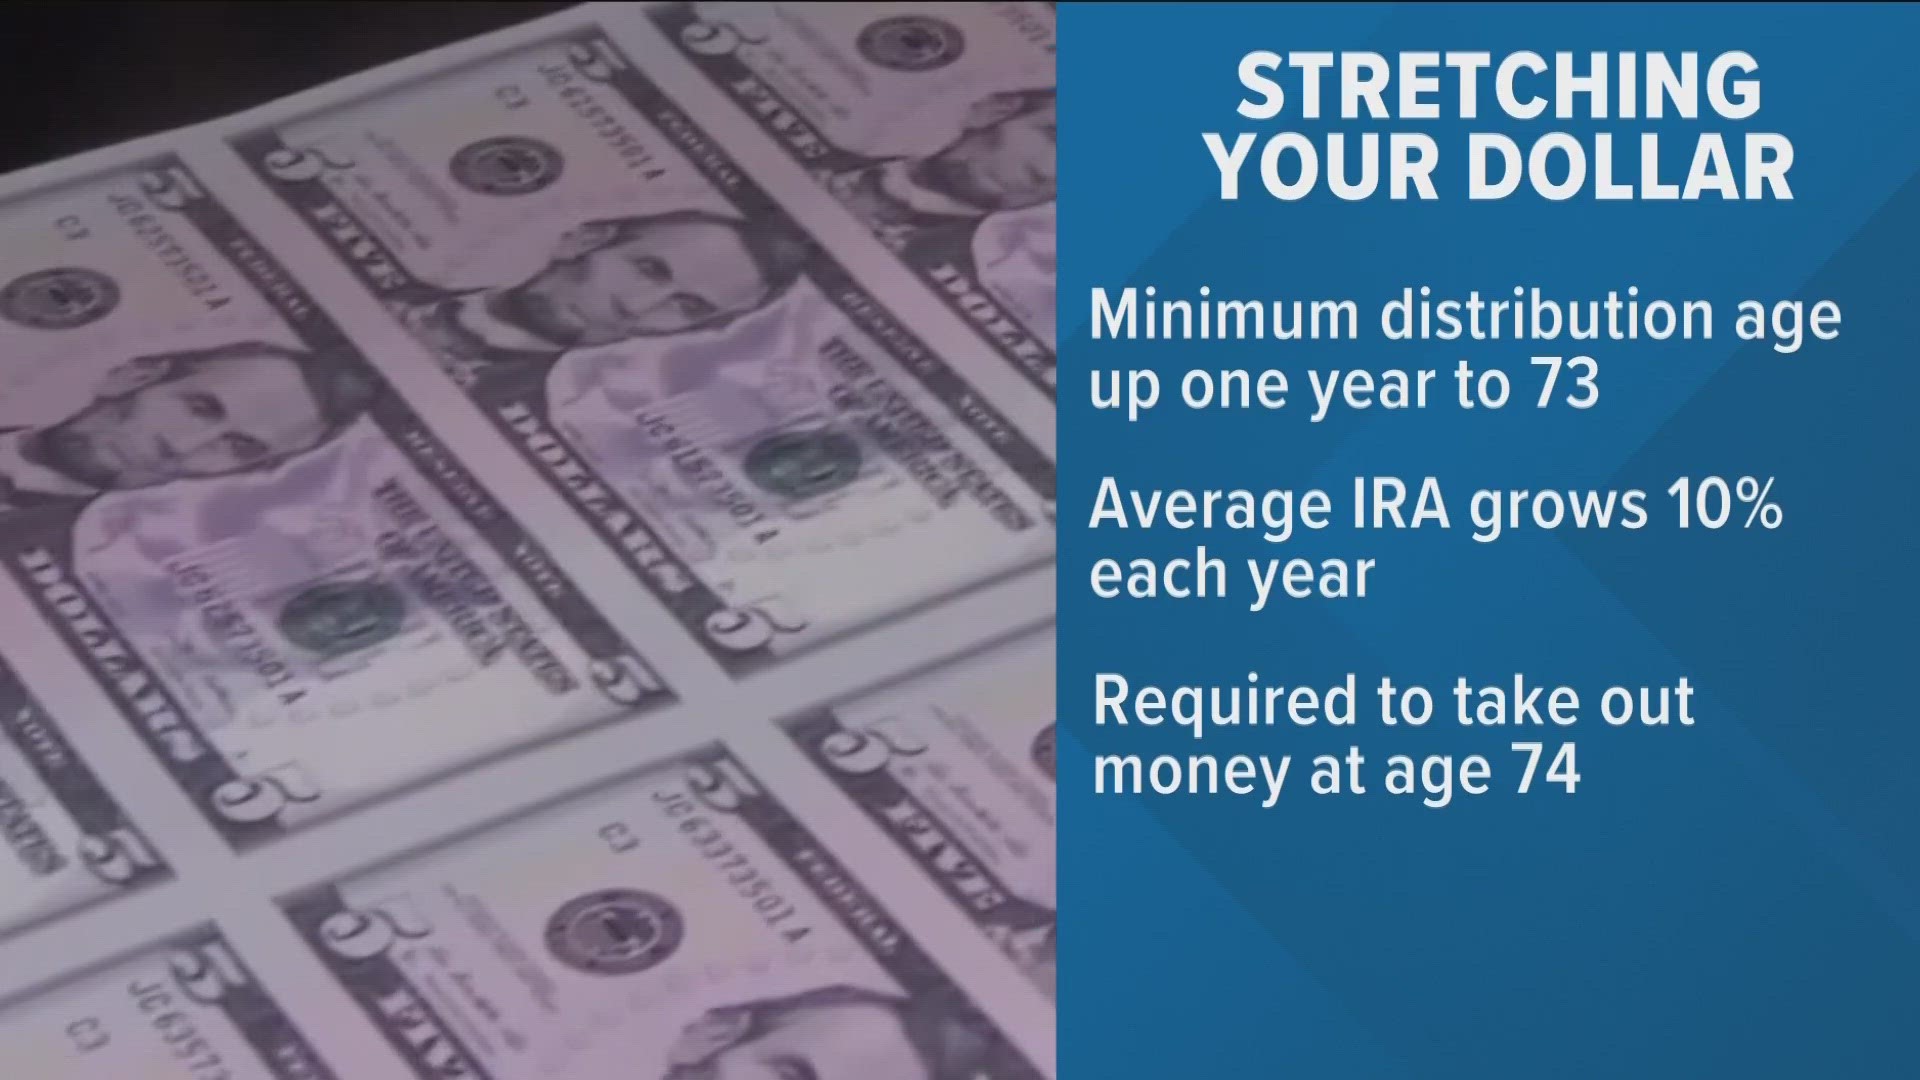 Changes in Roth IRA rules may affect your retirement plans.